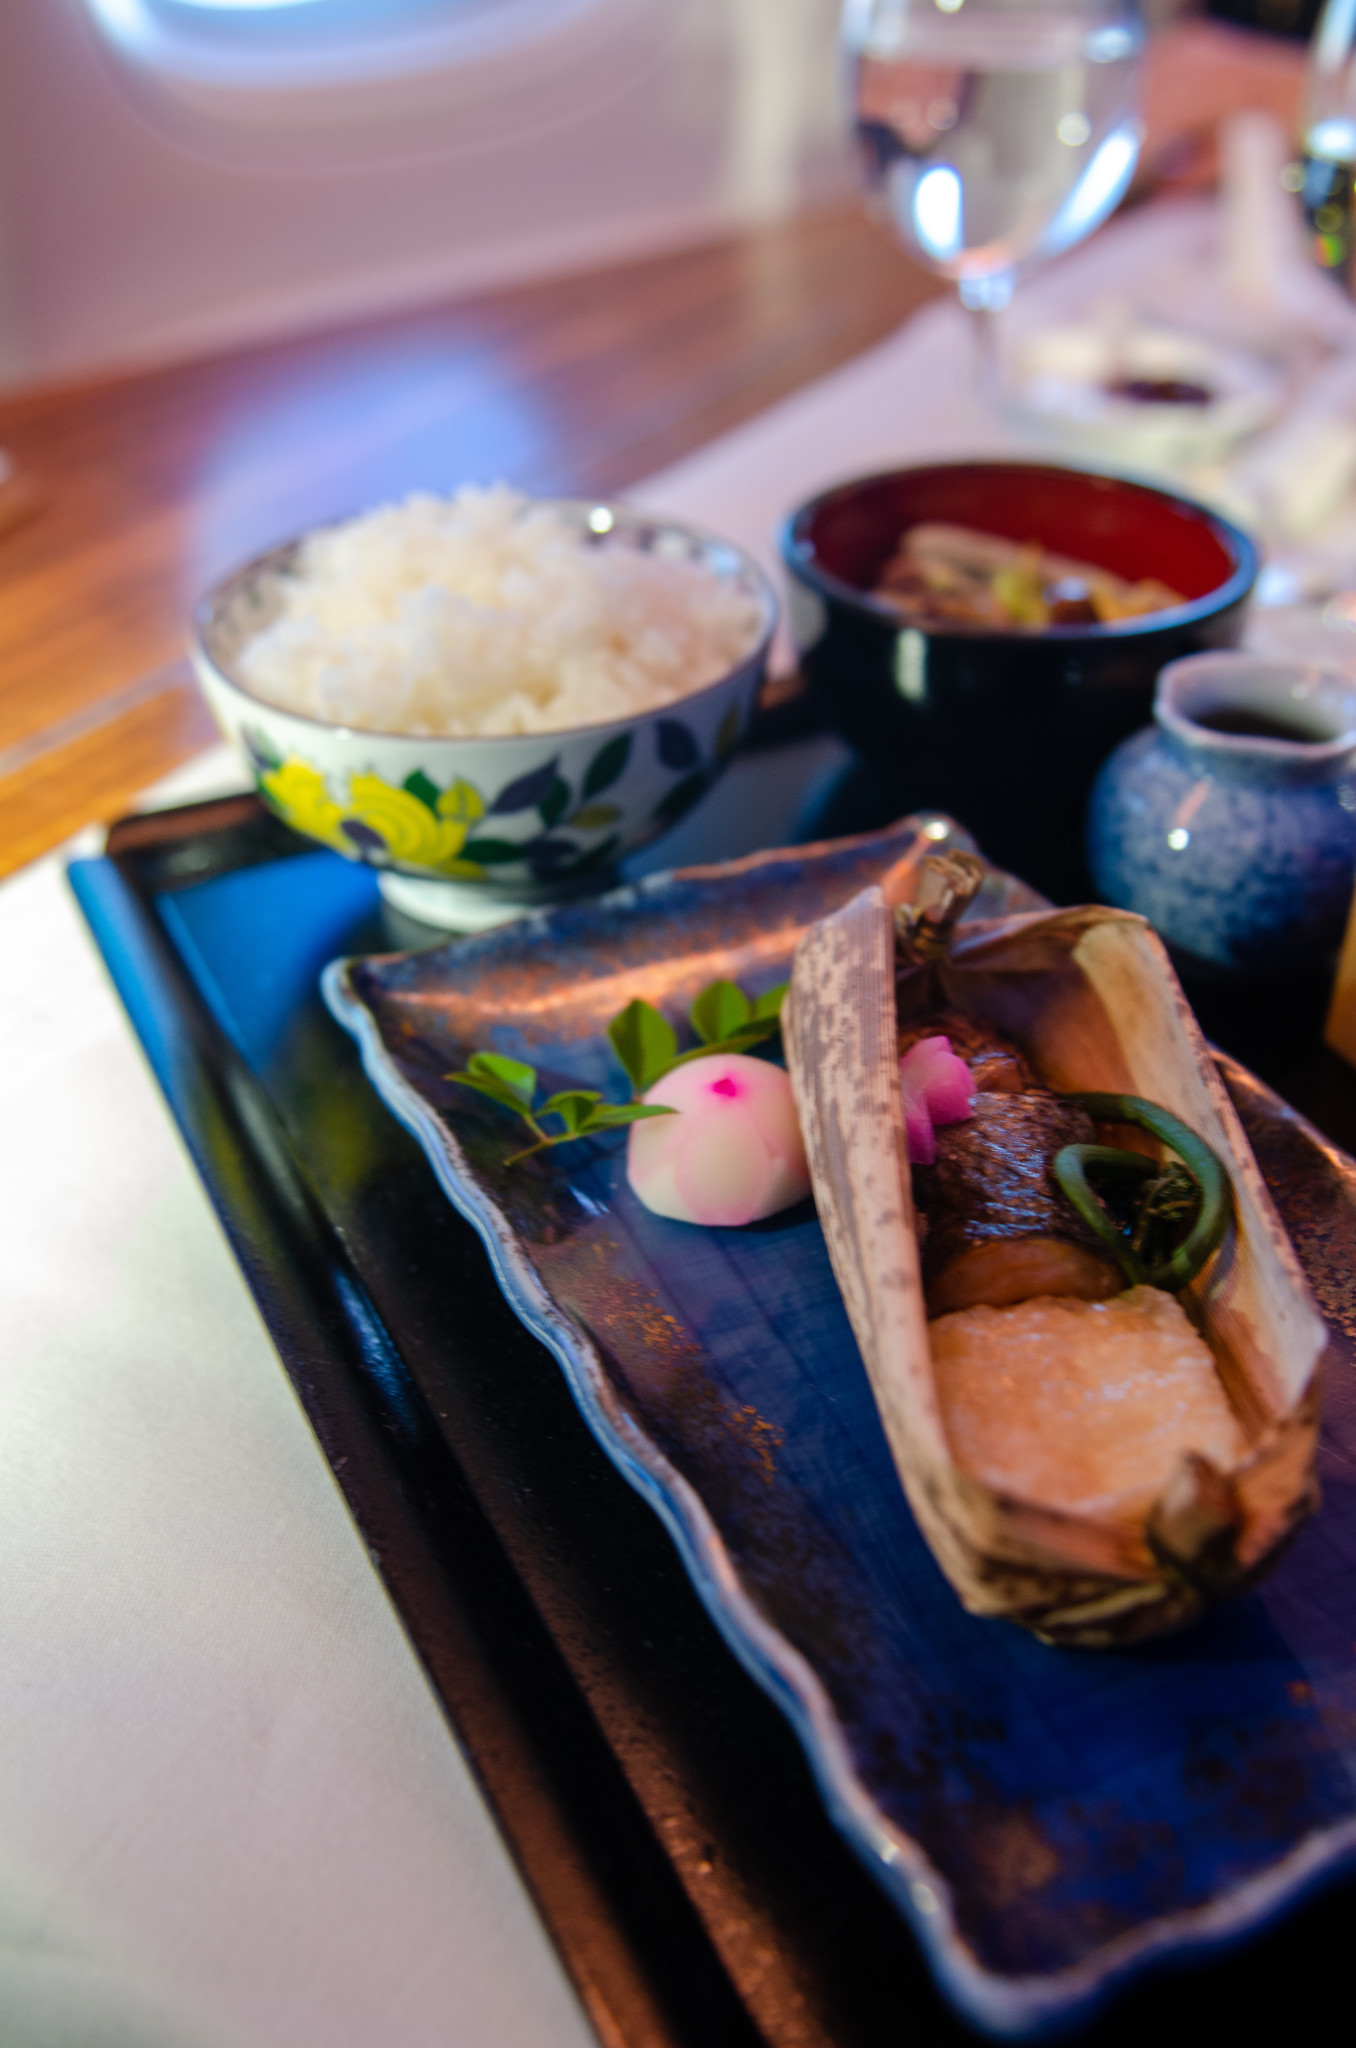 Keiseki Dinner in der Cathay Pacific First Class